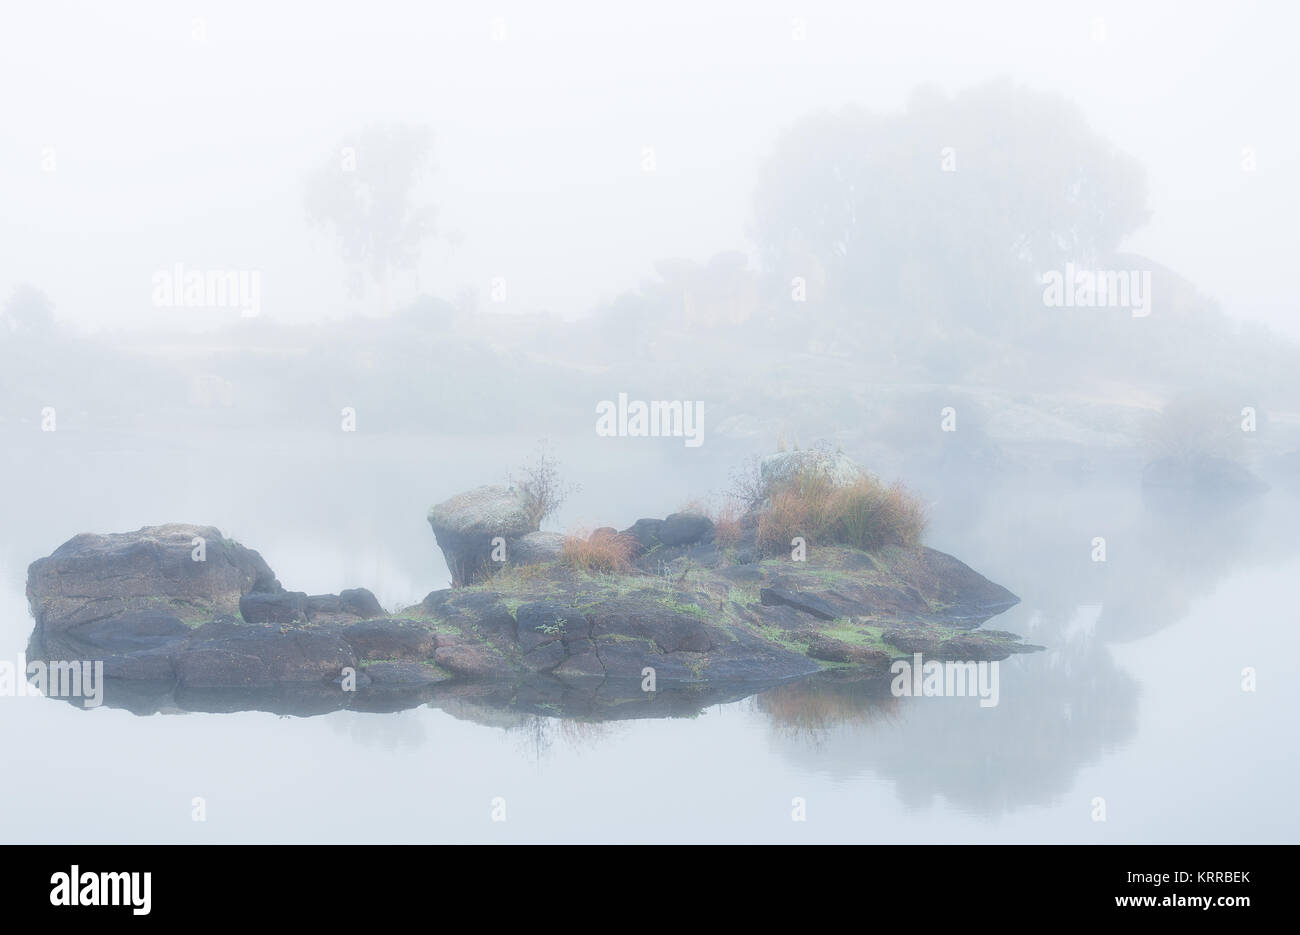 Landscape with fog in a lake. Landscape in the natural area of the Barruecos. Spain. Stock Photo